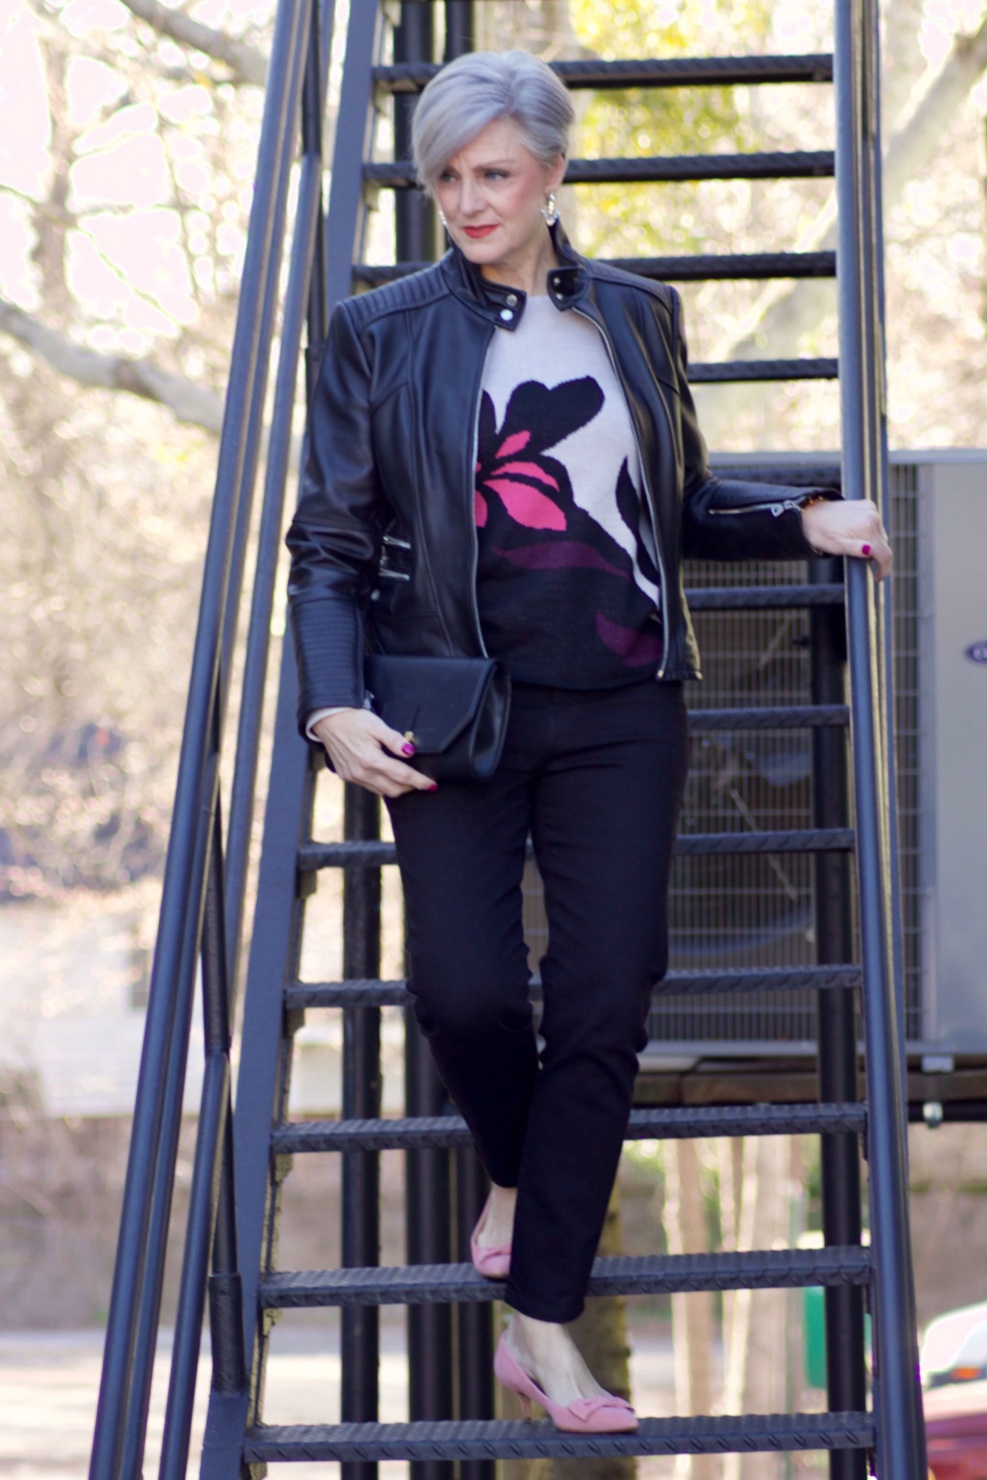 beth from Style at a Certain Age wears a floral jacquard sweater, black skinny jeans, black leather moto jacket and pink suede pumps for date night